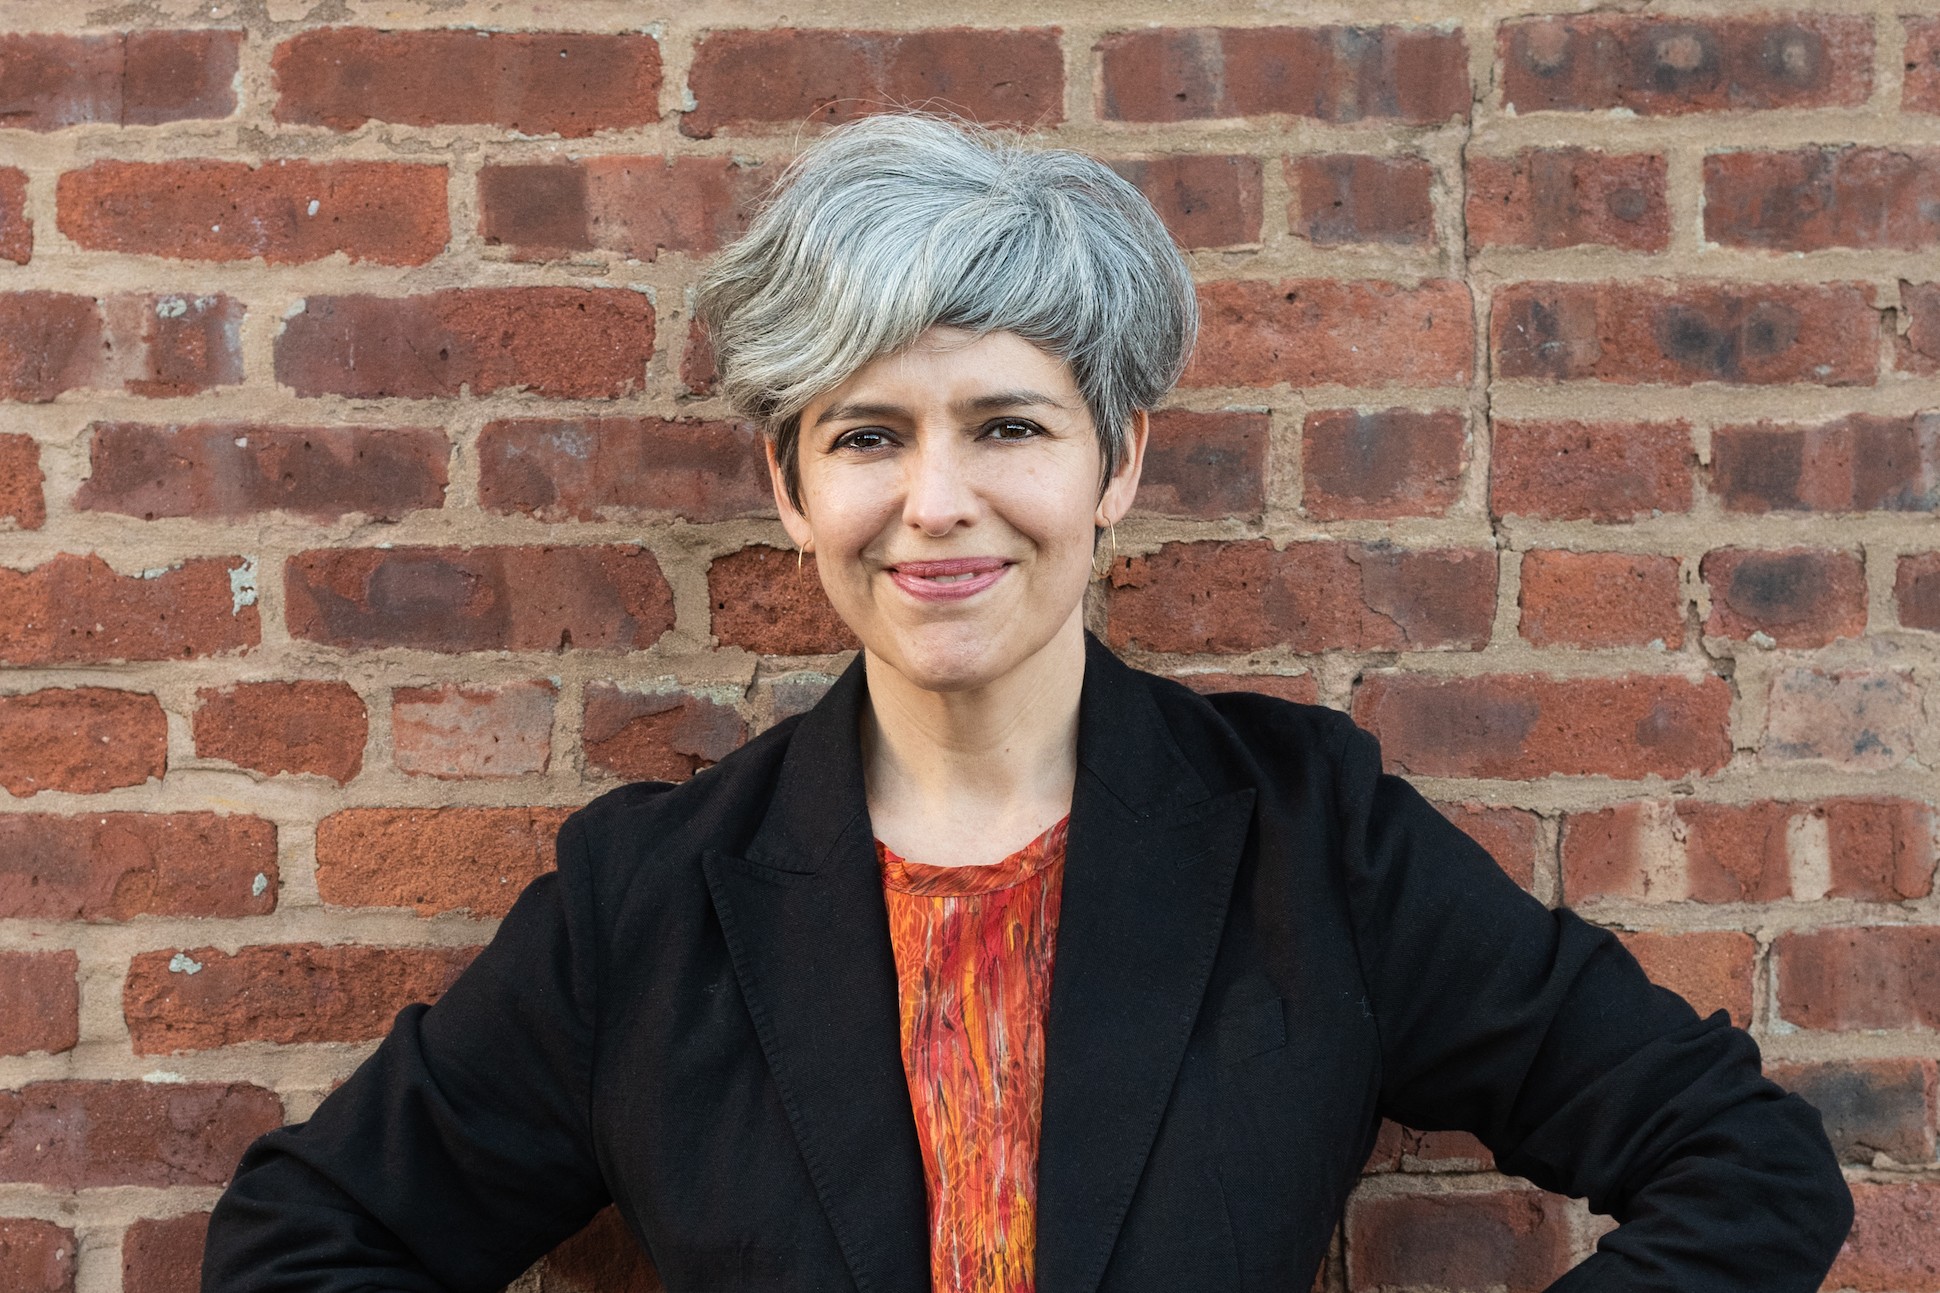 woman with short grey hair stands in front of a brick wall